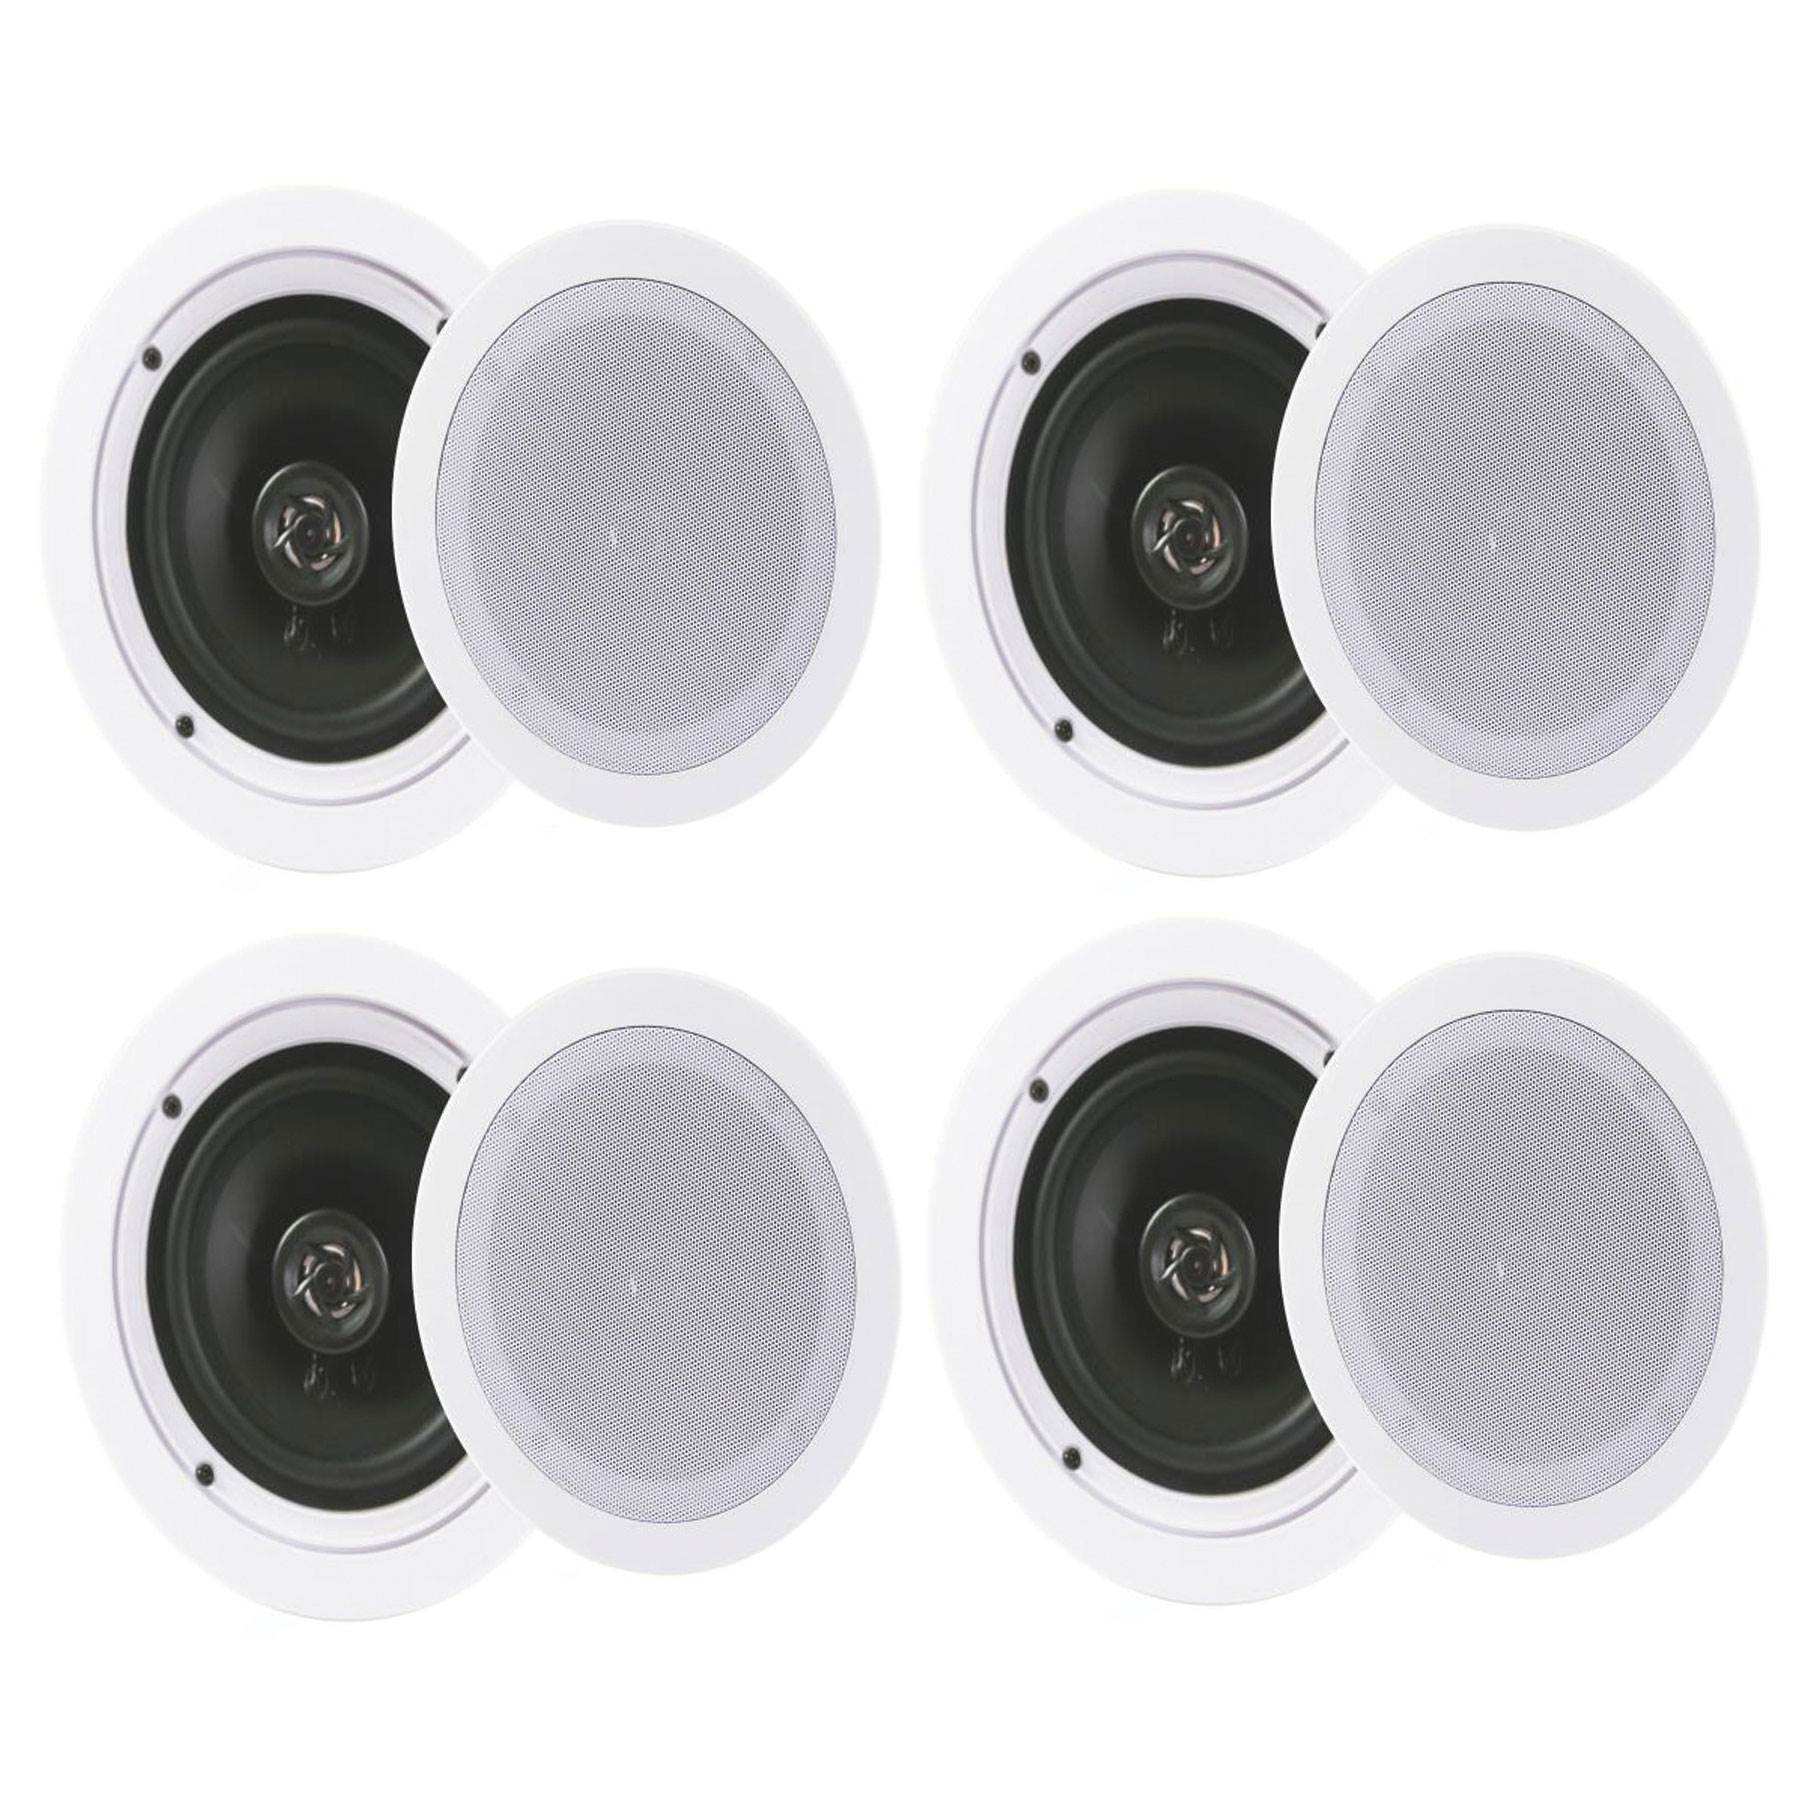 Pyle Audio 5.25 Inch 2 Way 150W Ceiling Wall Stereo Bluetooth Speakers, PDIC1651RD (2 Pairs) - image 1 of 6